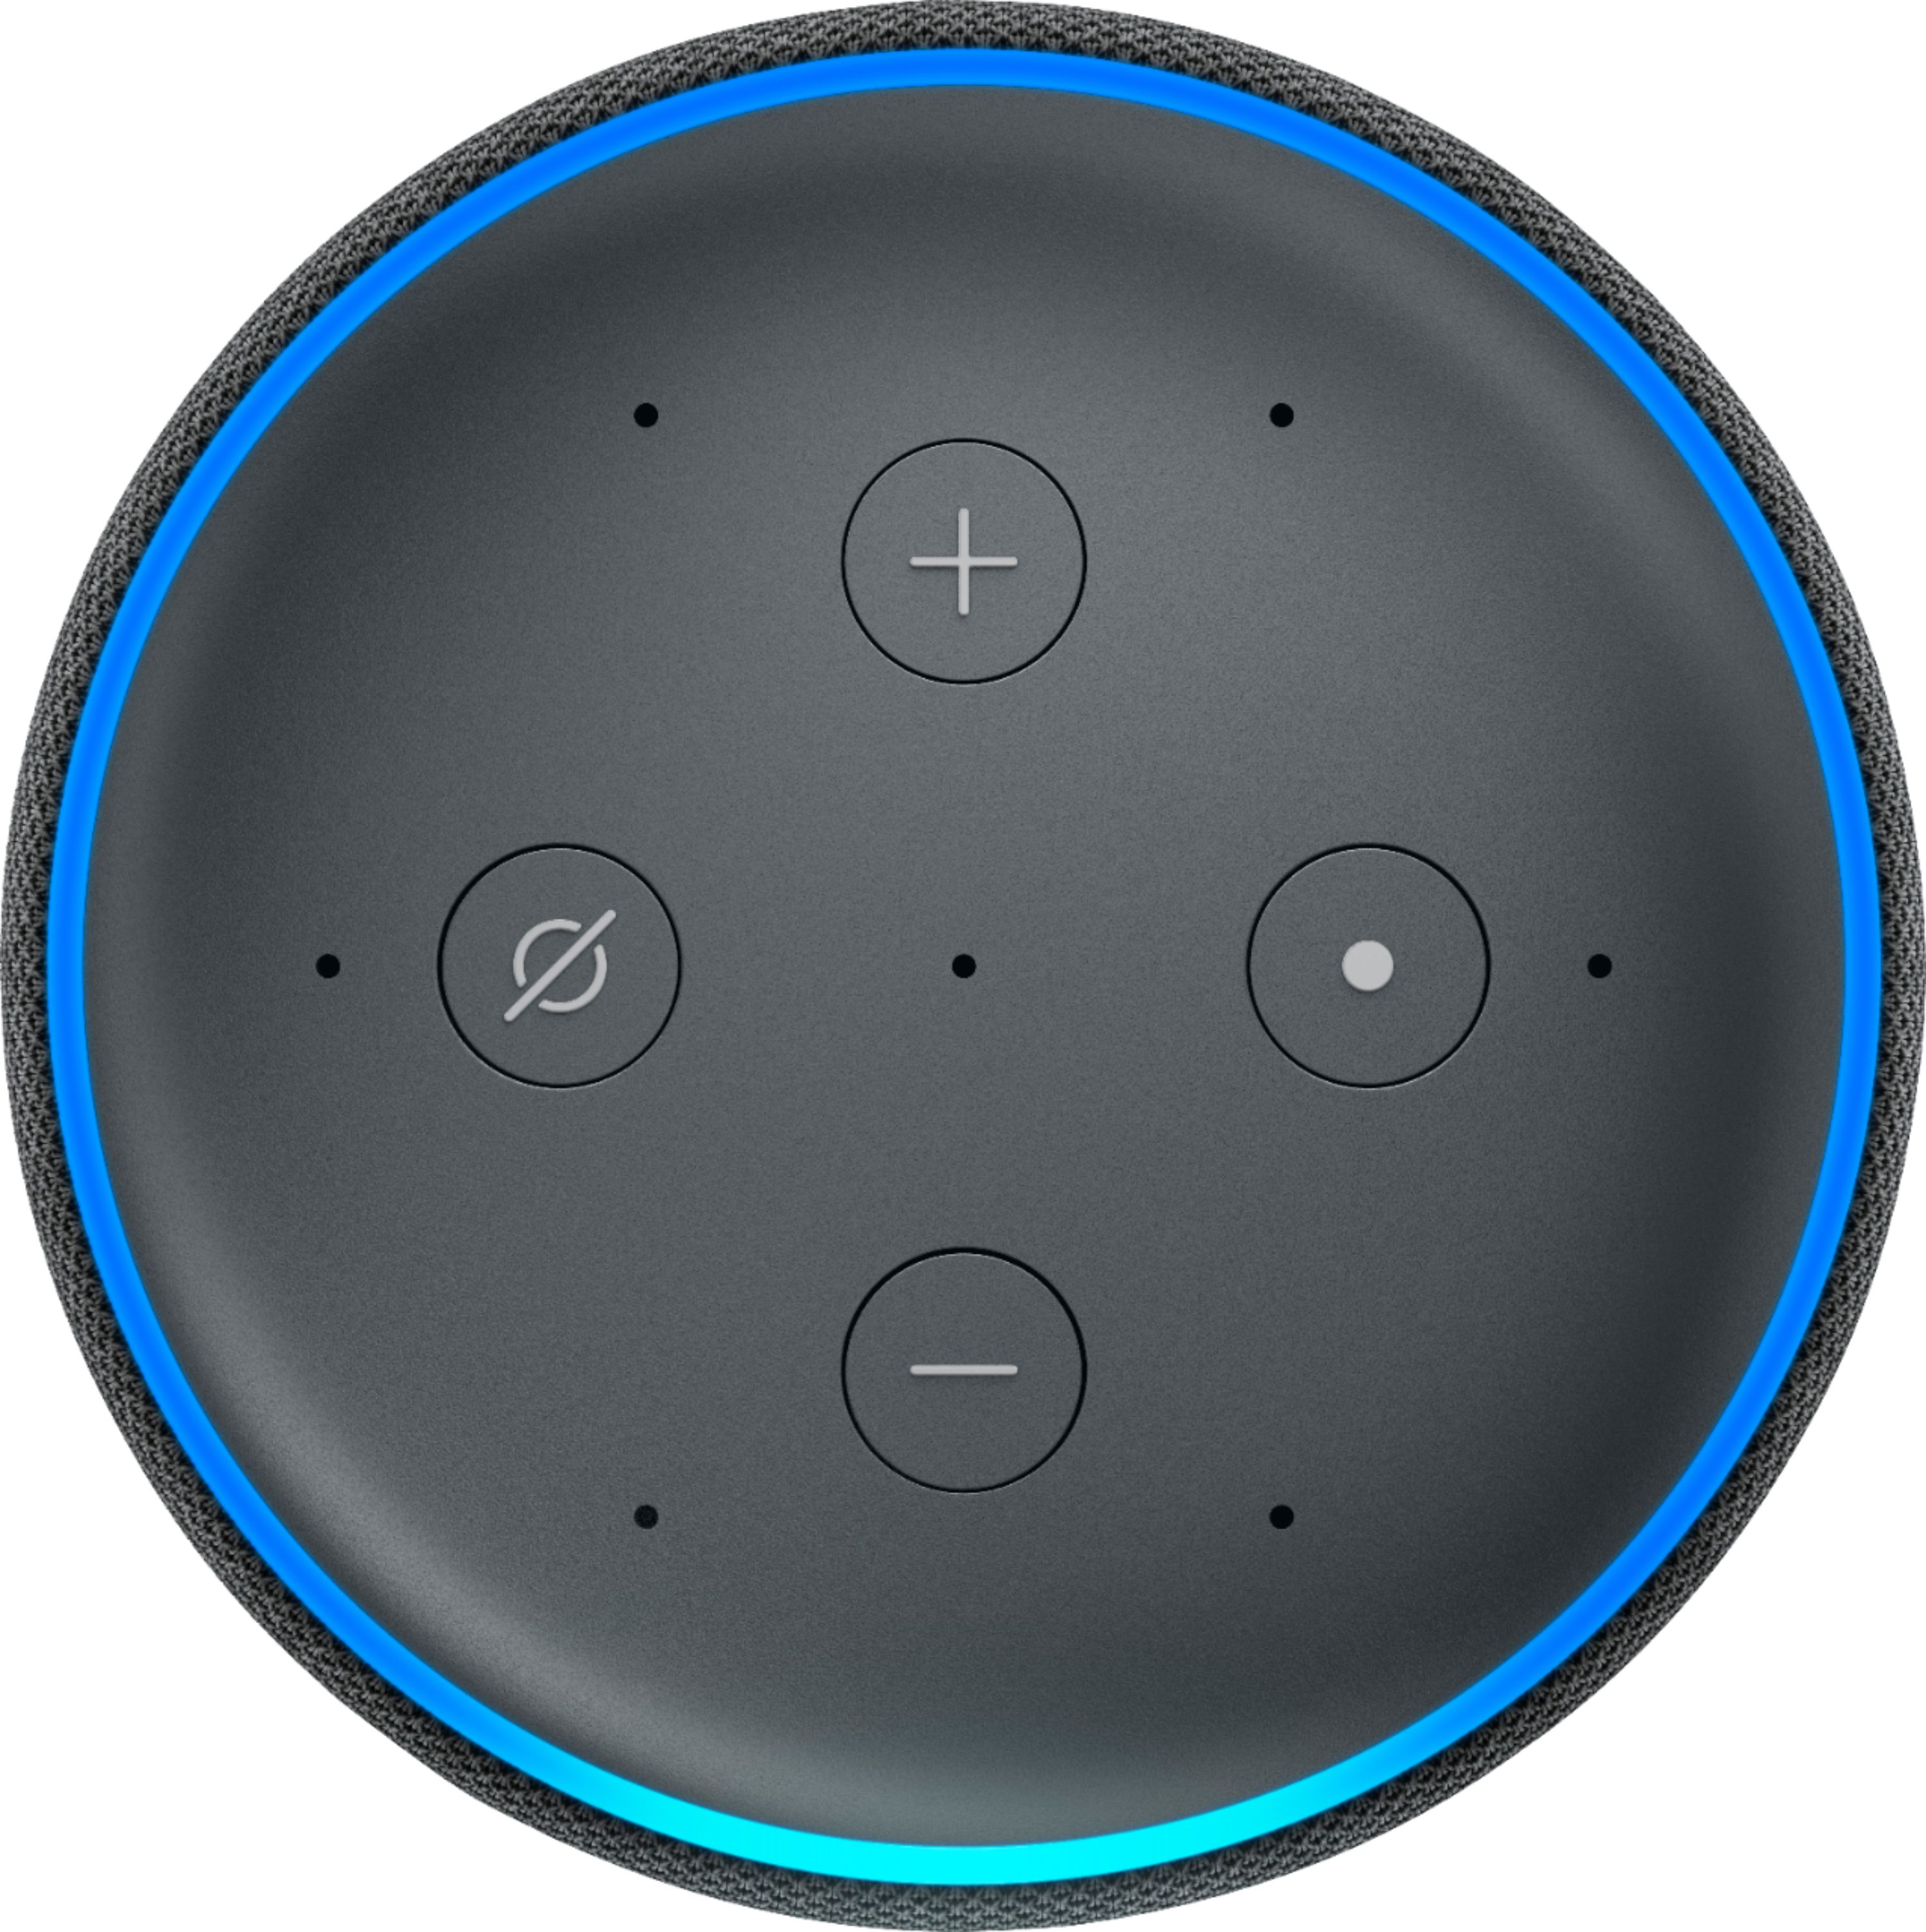 How to connect  Echo Plus to Zigbee smart home devices